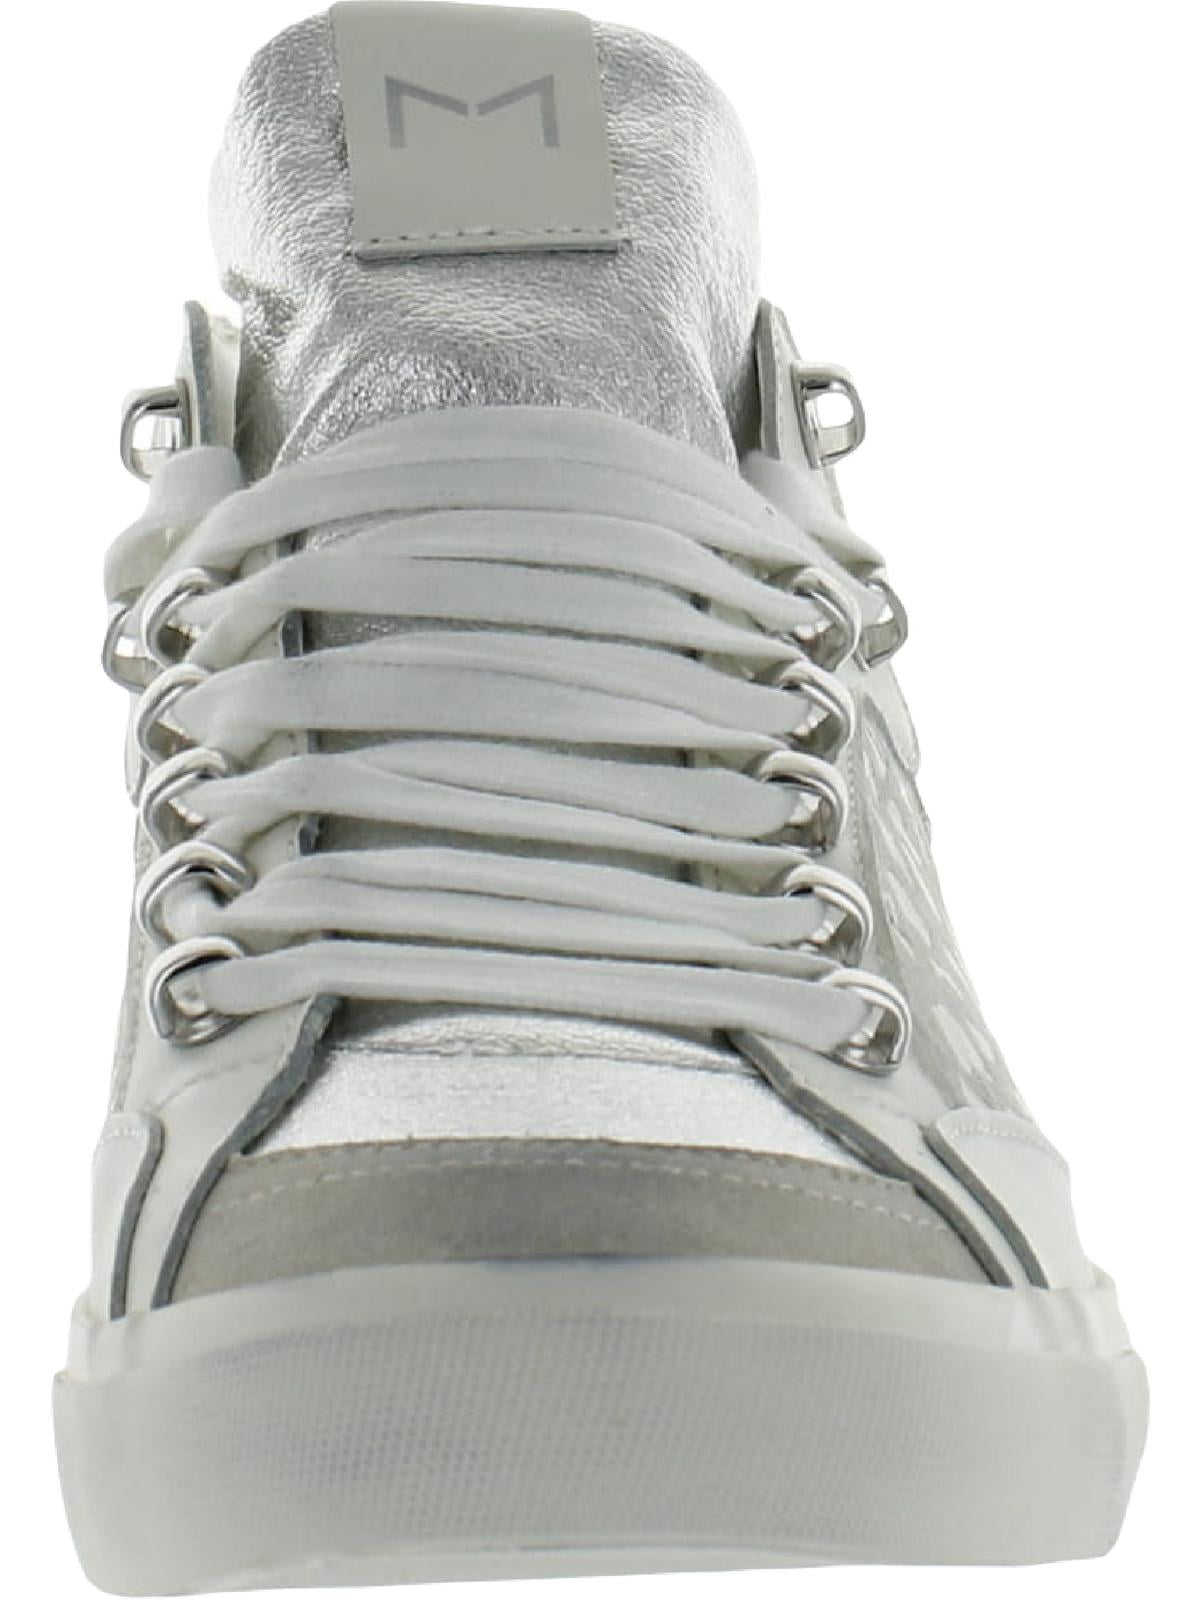 Women's Trainers | White, Chunky & Leather Sneakers | ASOS